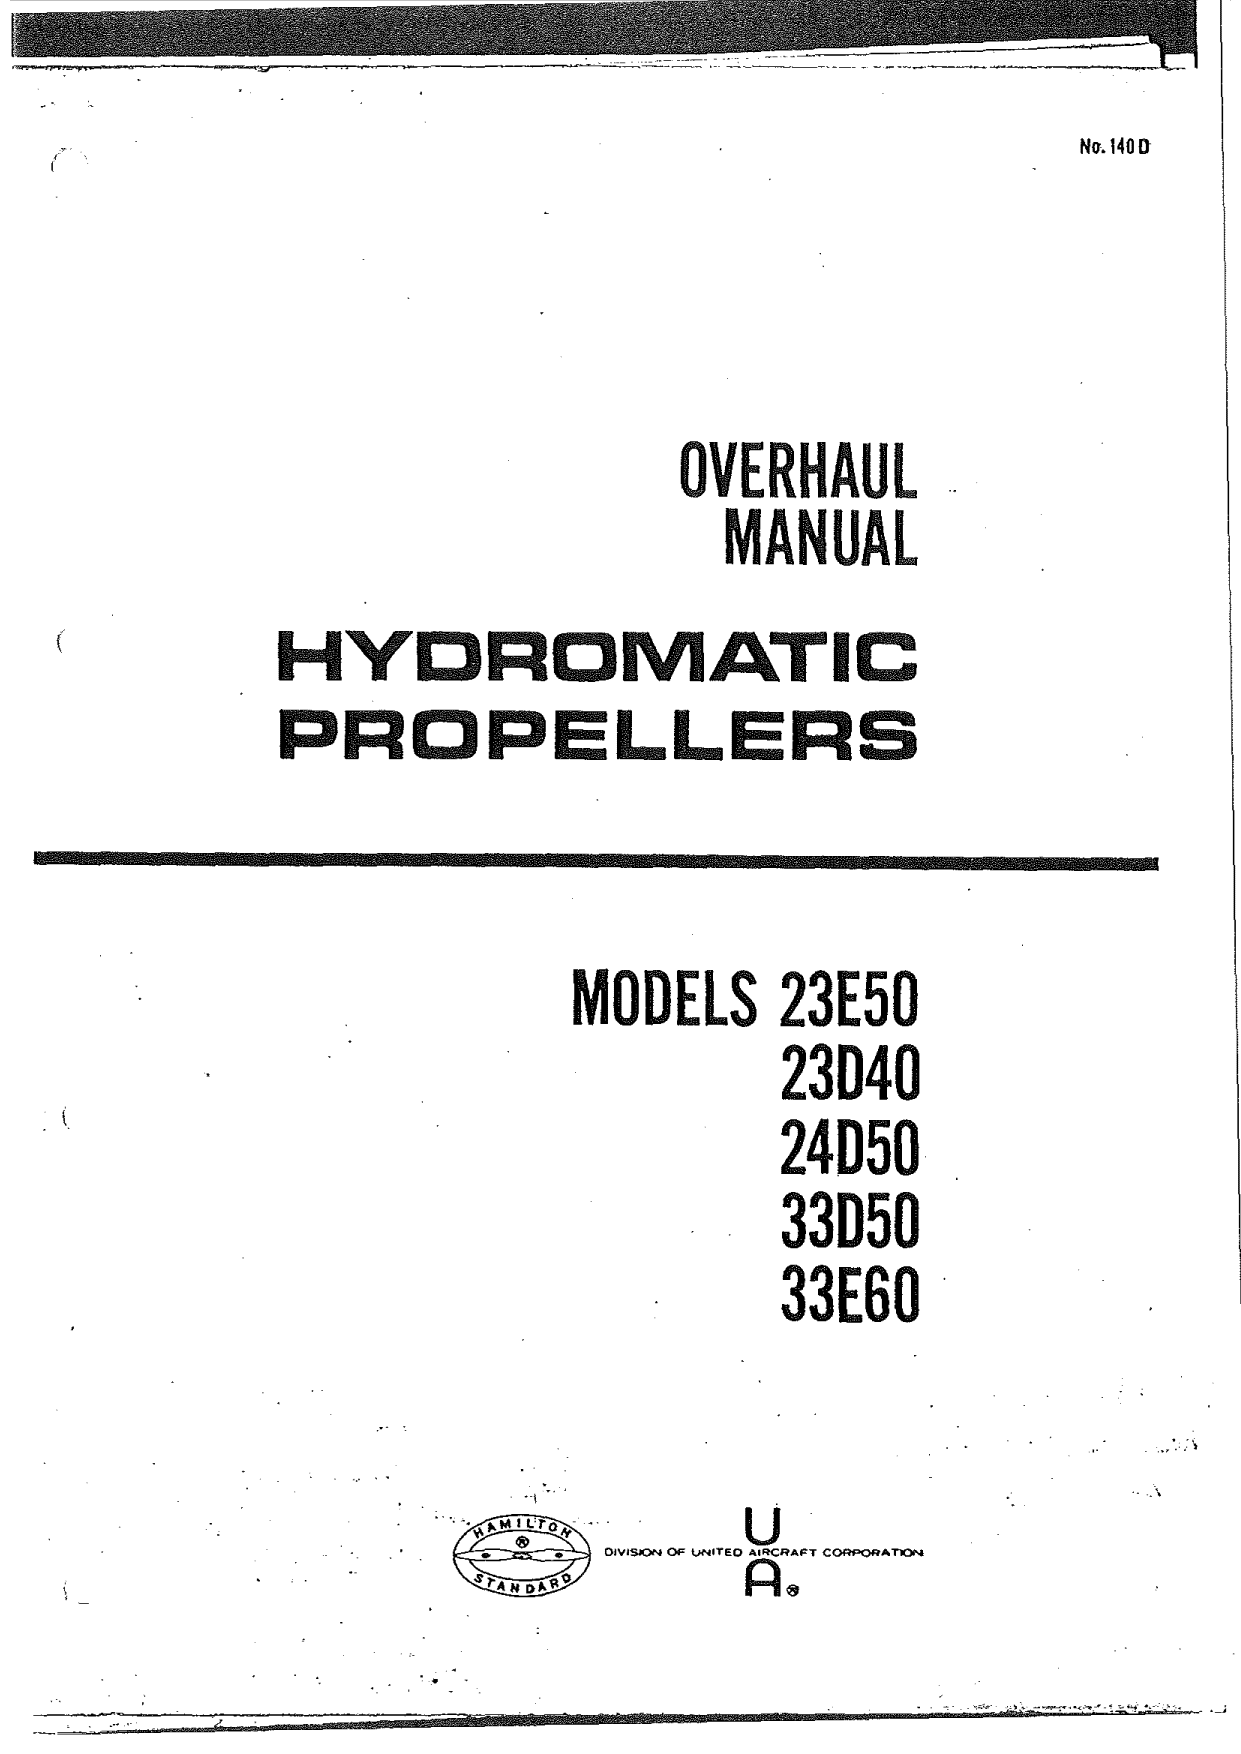 Sample page 1 from AirCorps Library document: Overhaul Manual for Hydromatic Propellers - Models 23E50, 23D40, 24D50, 33D50, and 33E60